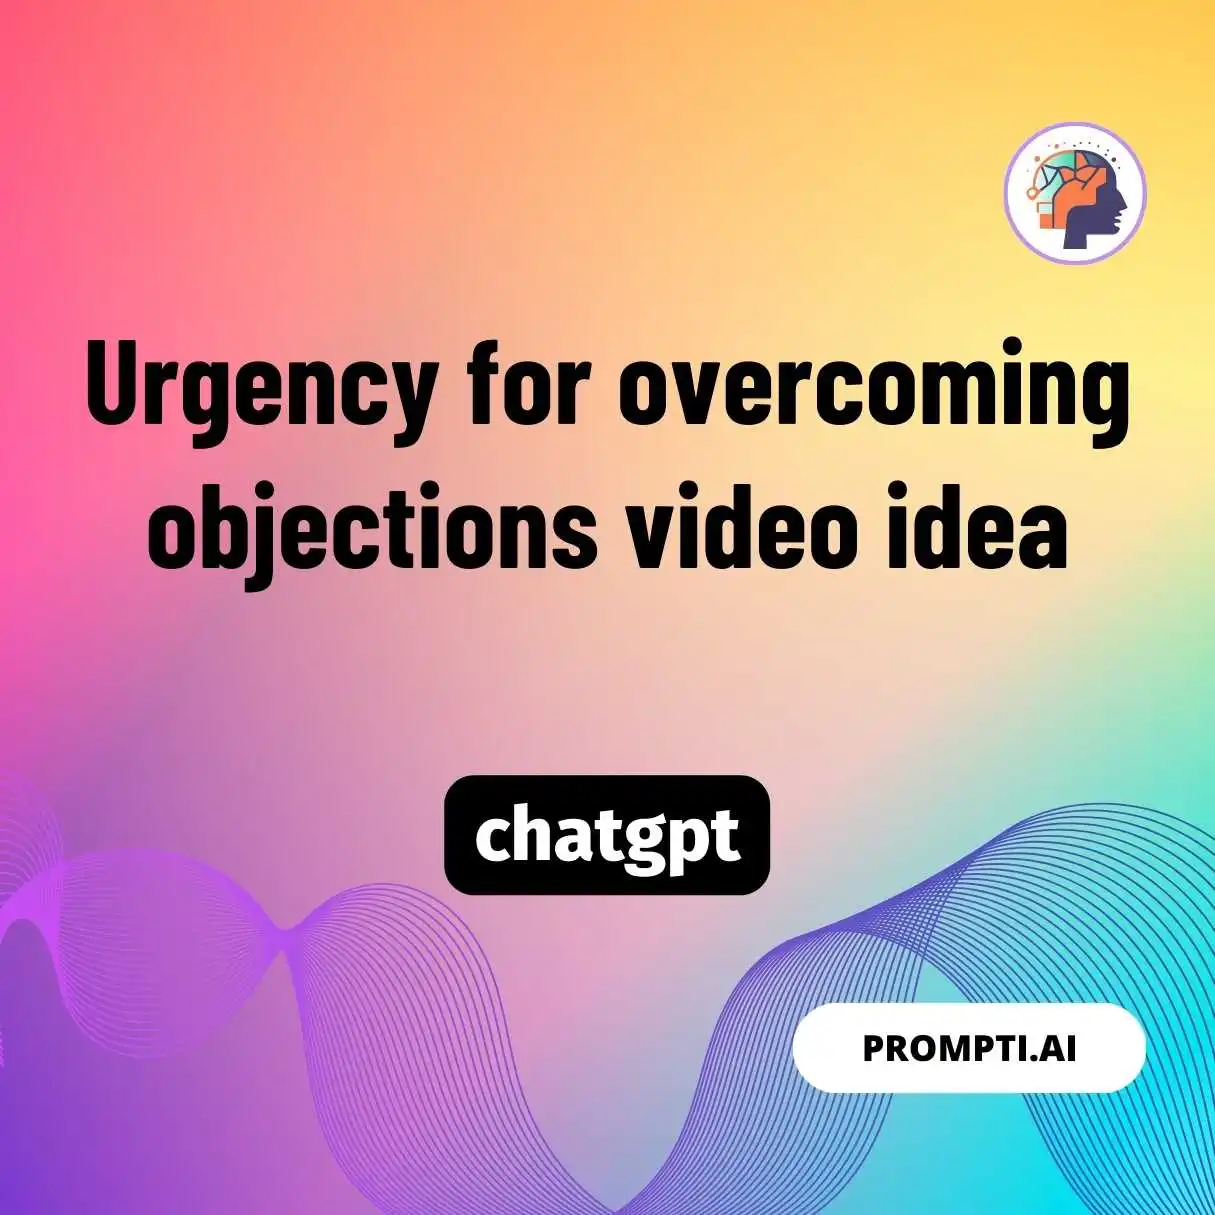 Urgency for overcoming objections video idea